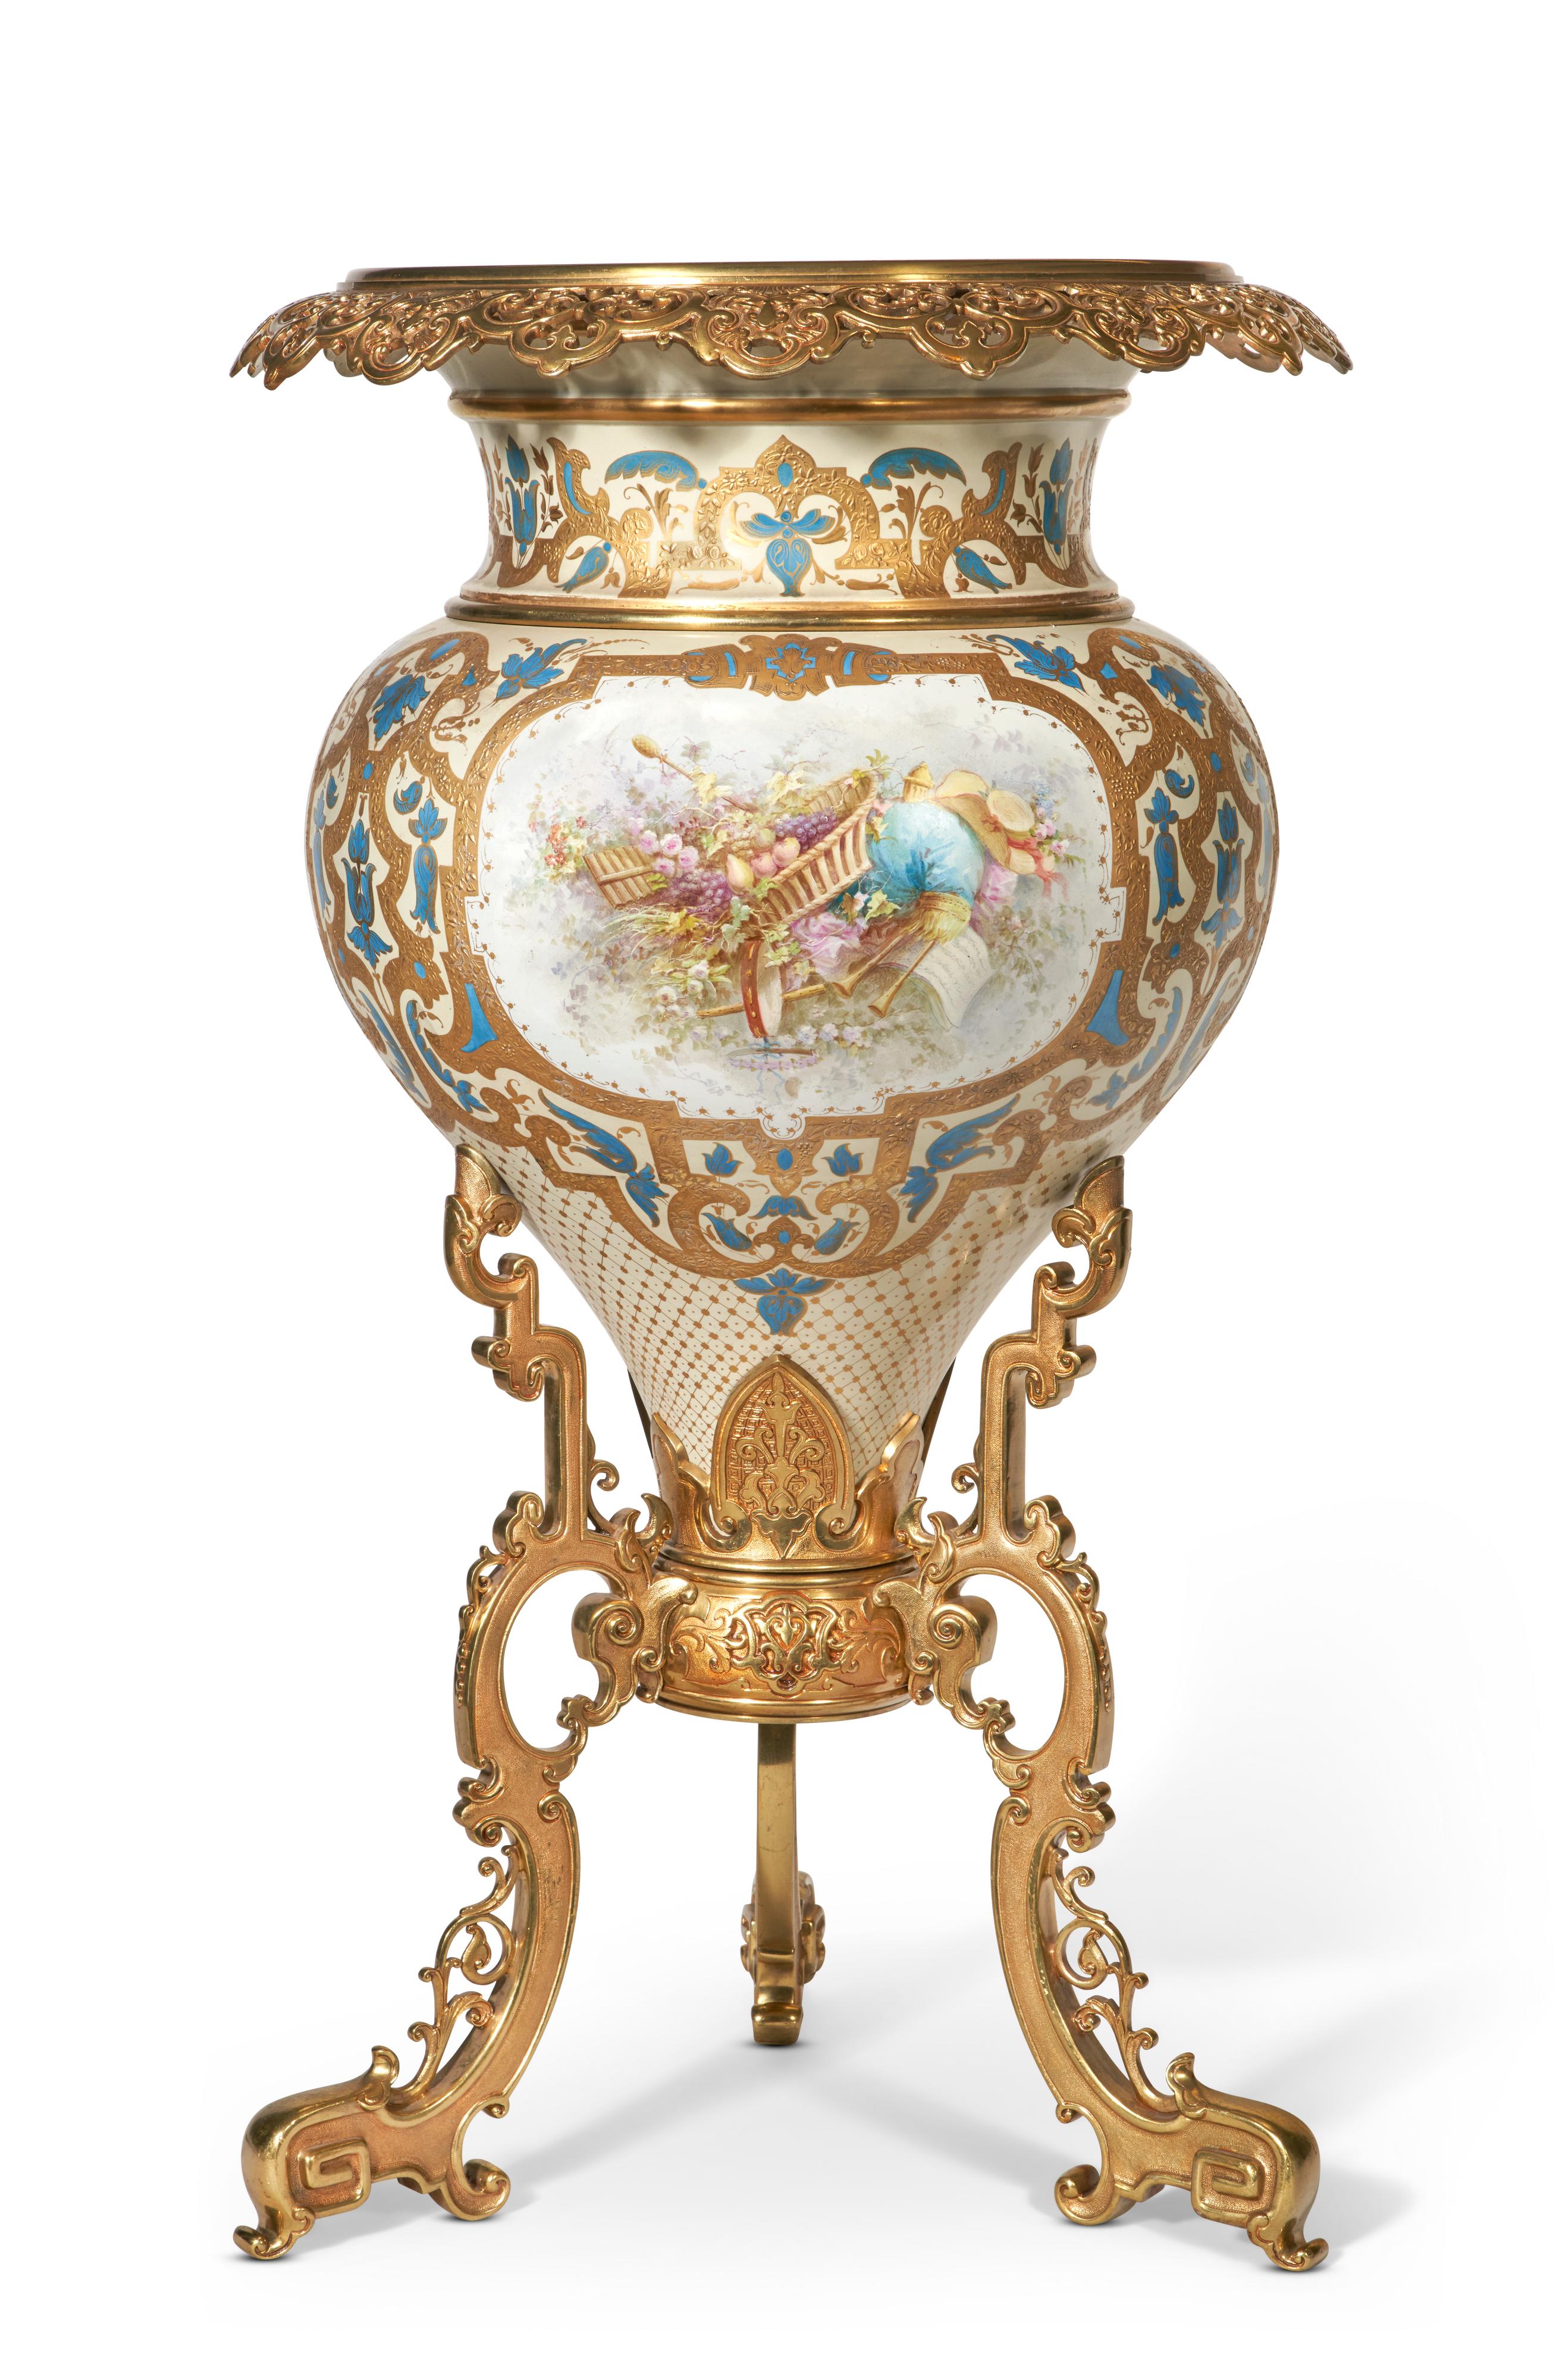 Gilt Large & Important French 19th C. Sevres Porcelain Ormolu Mounted Jardiniere For Sale